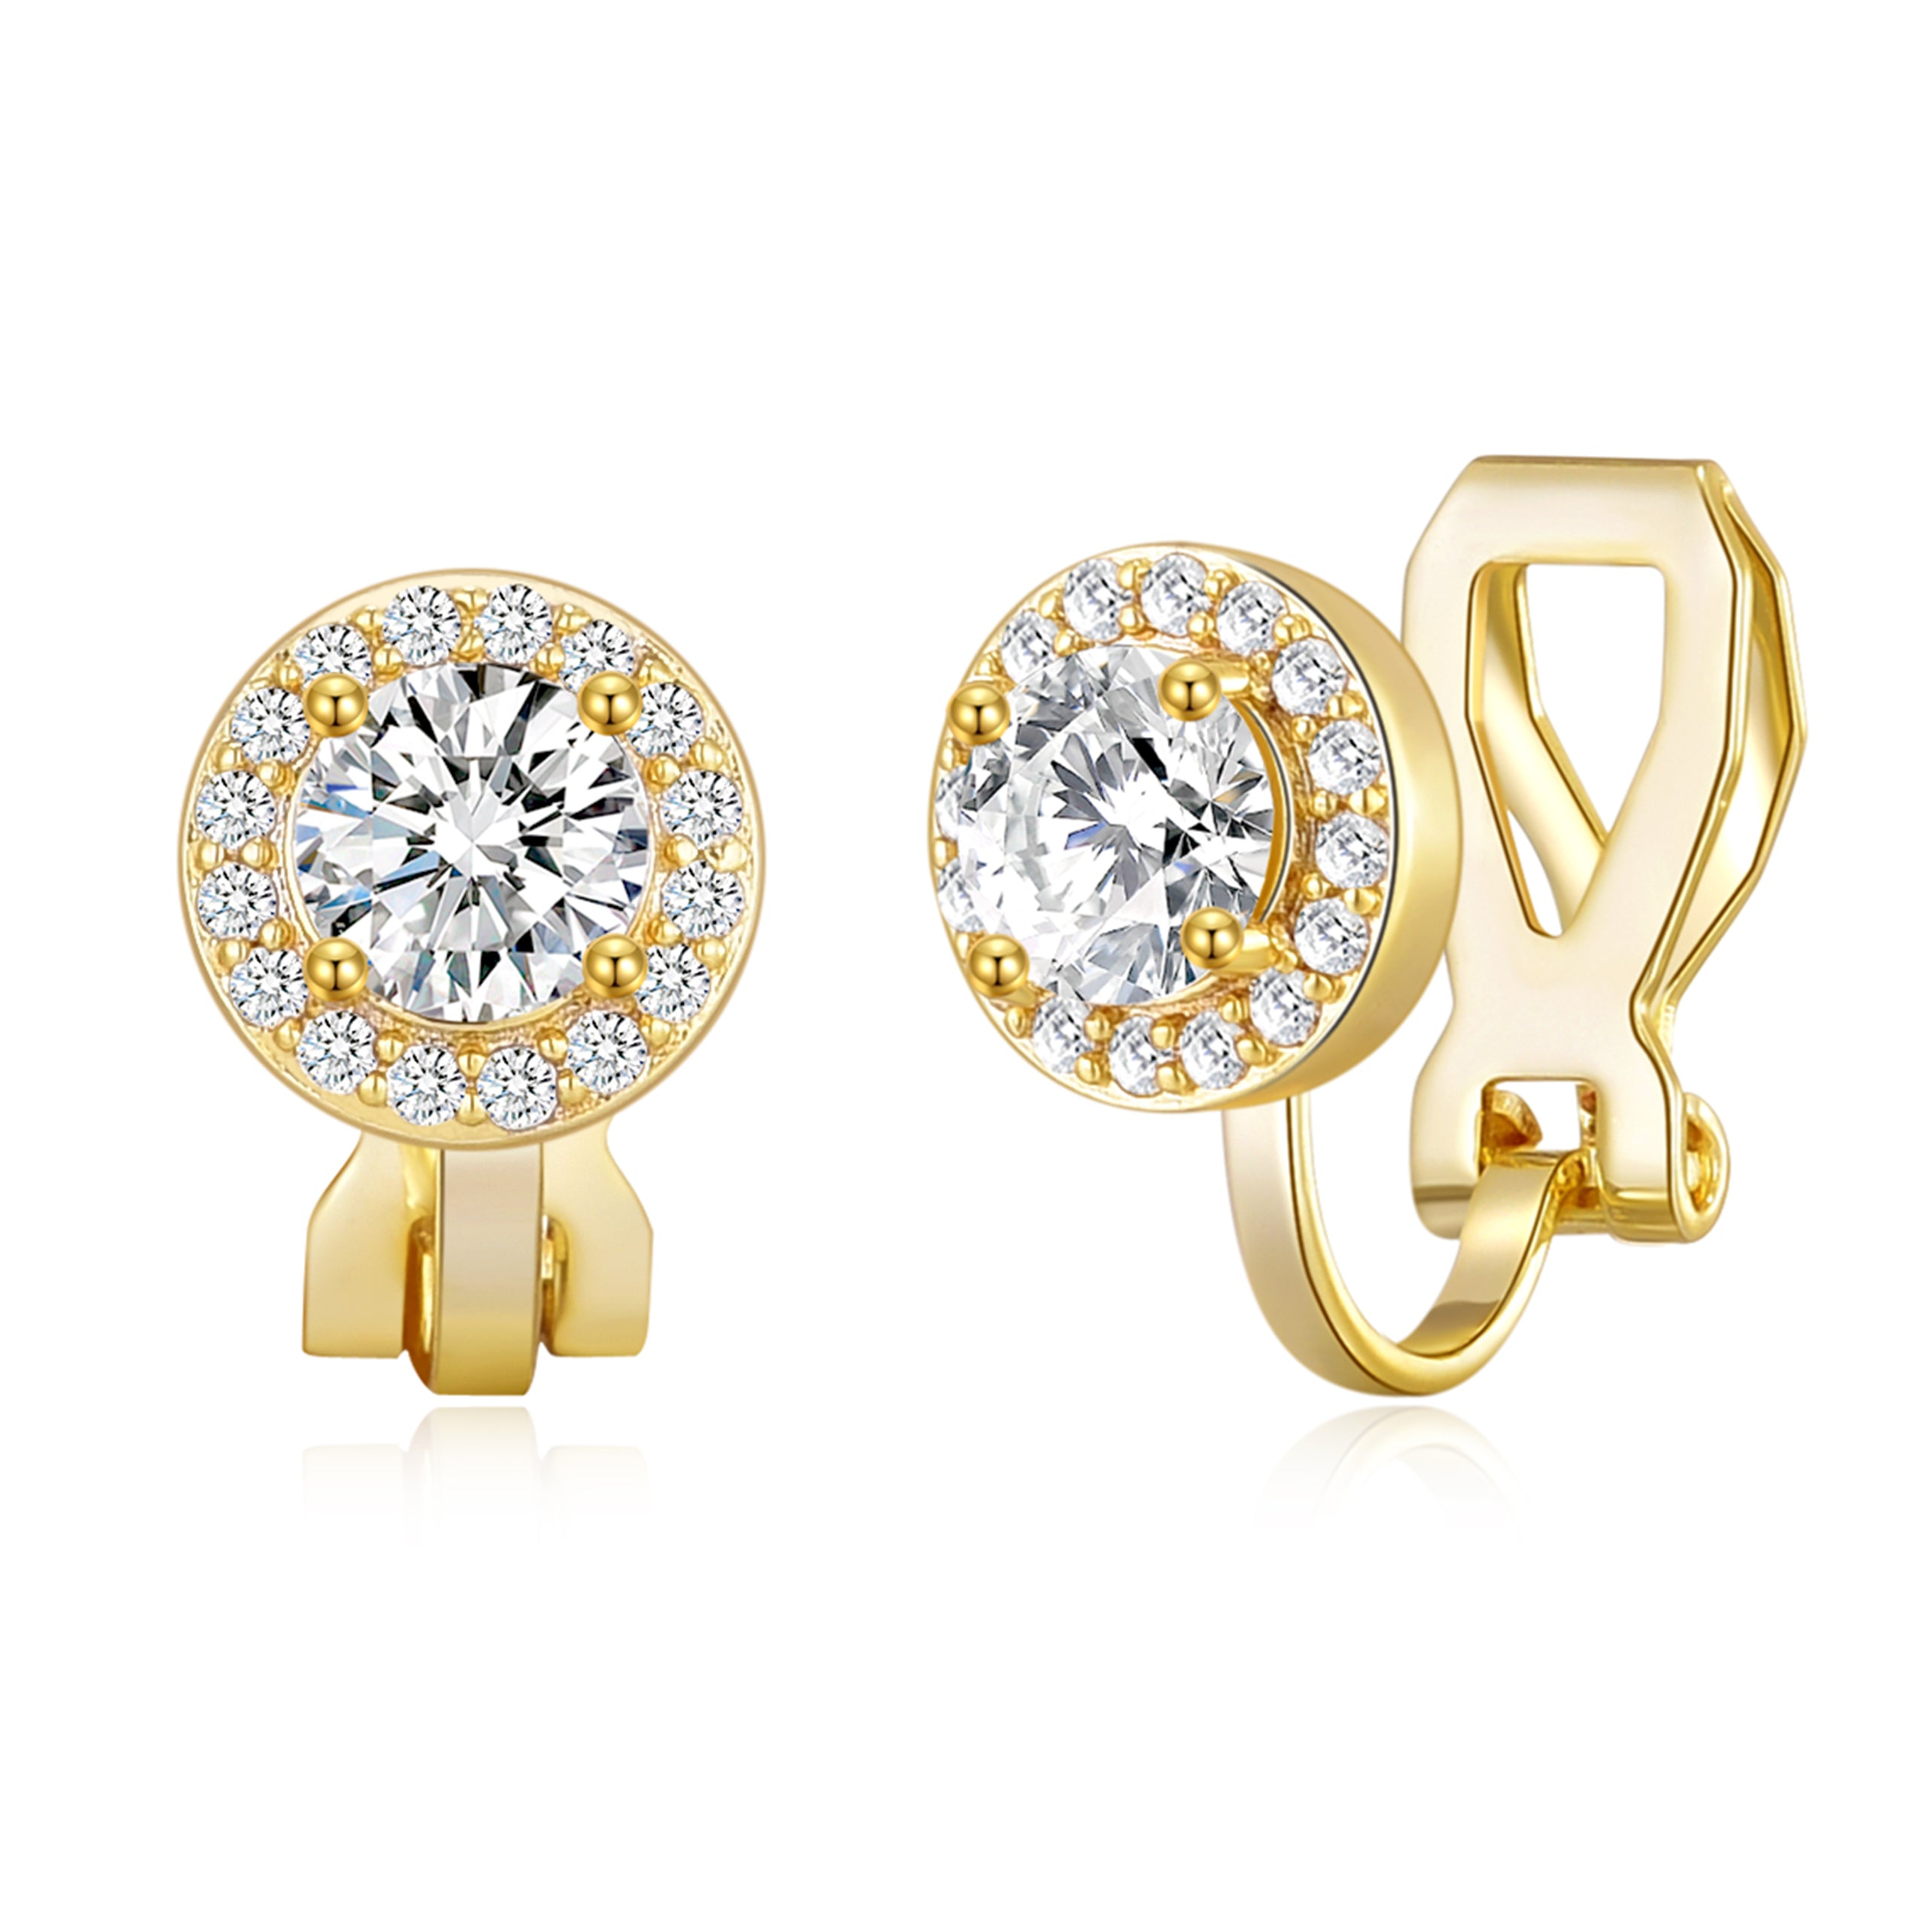 Gold Plated Round Halo Clip On Earrings Created with Zircondia® Crystals by Philip Jones Jewellery